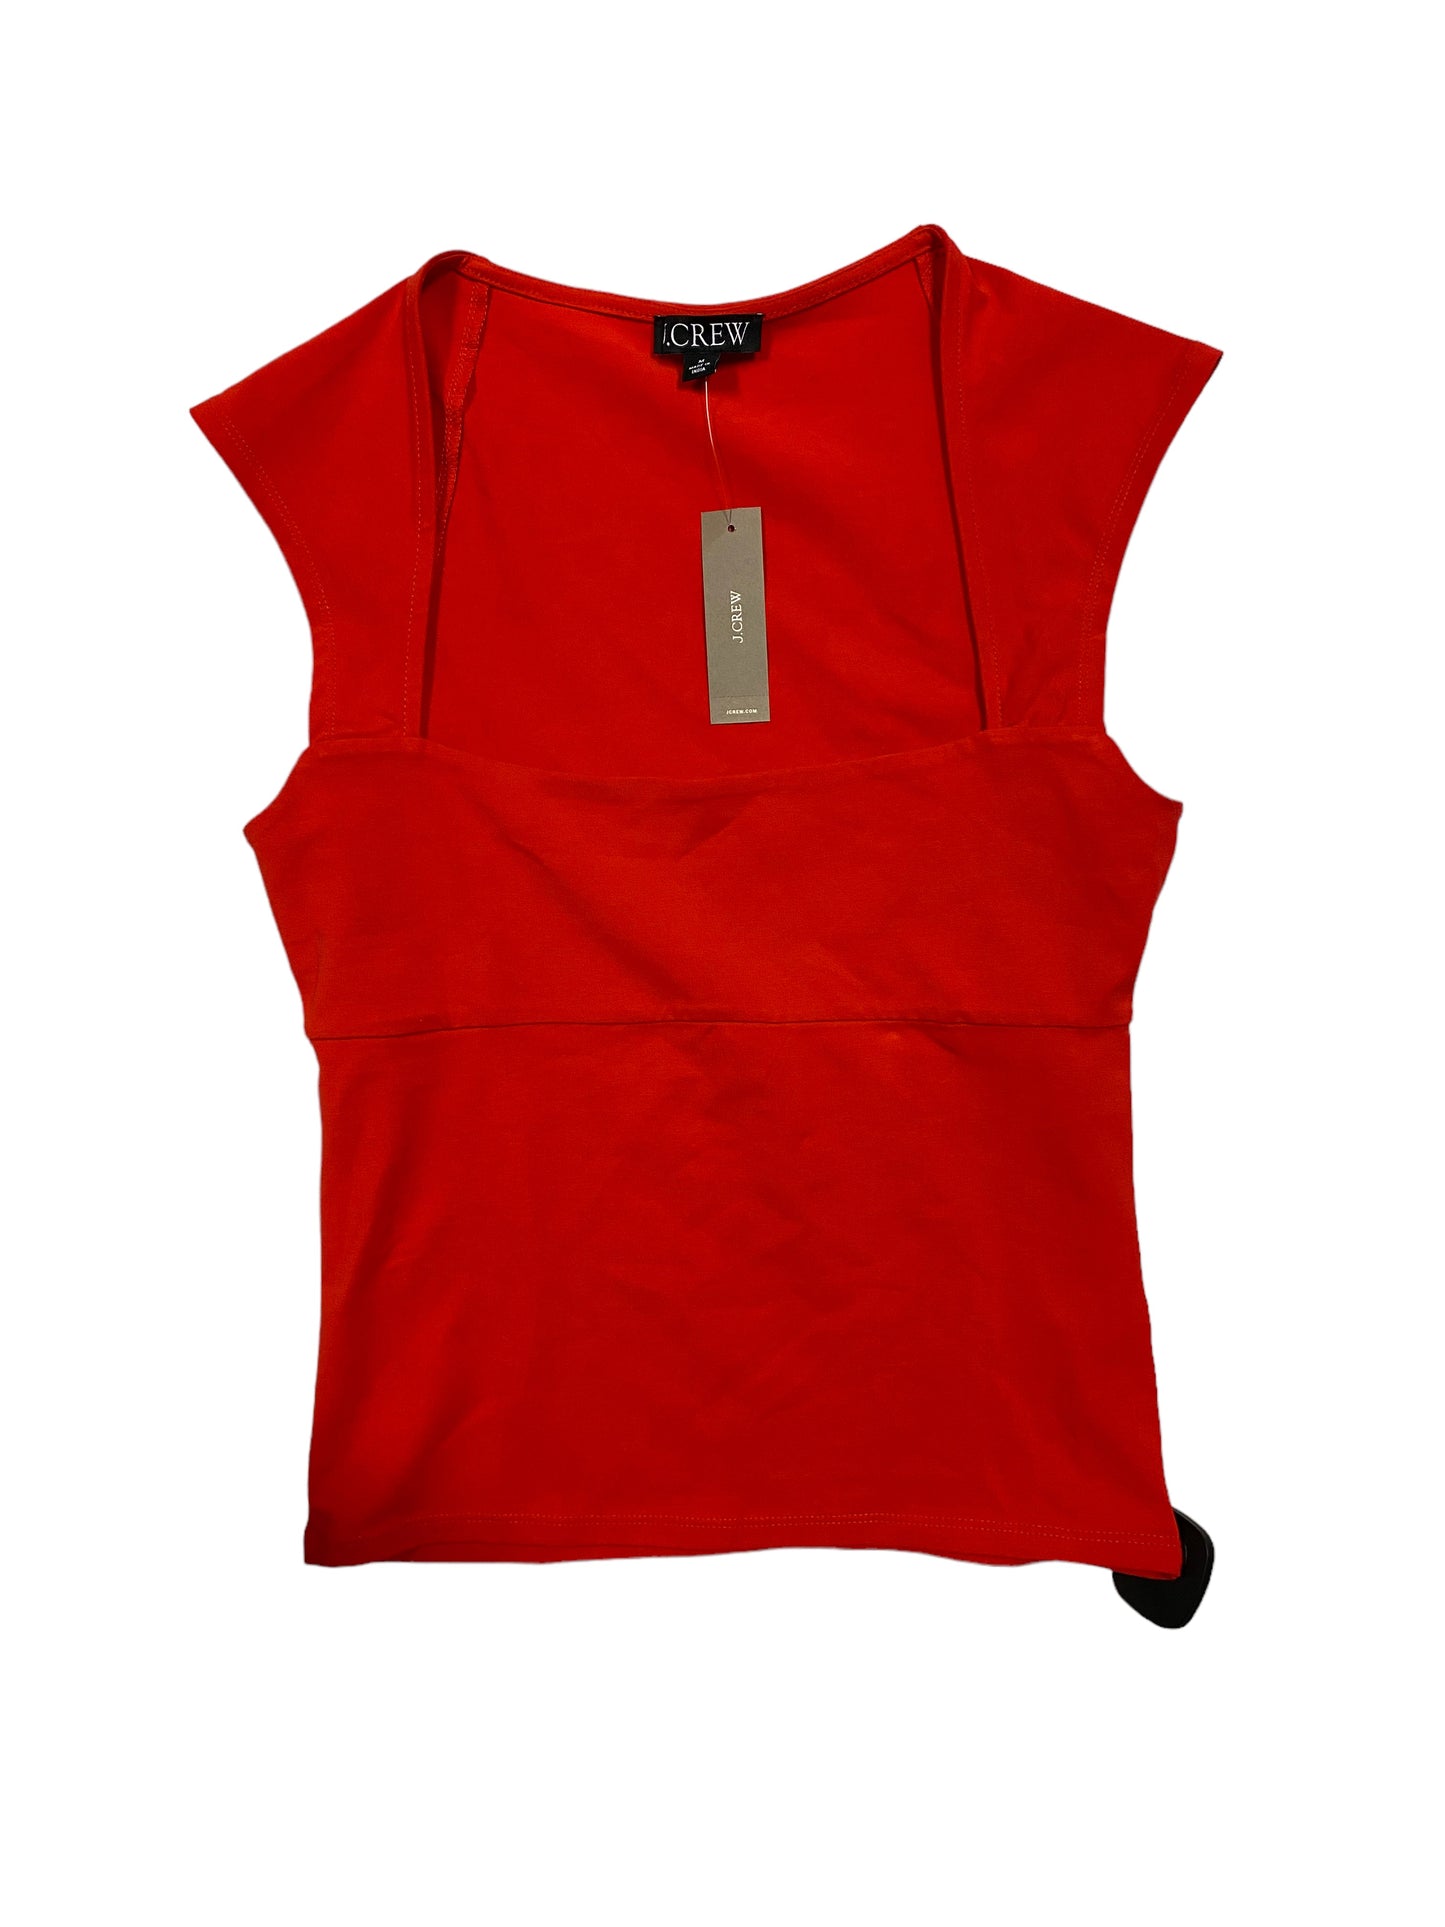 Red Top Short Sleeve J. Crew, Size M